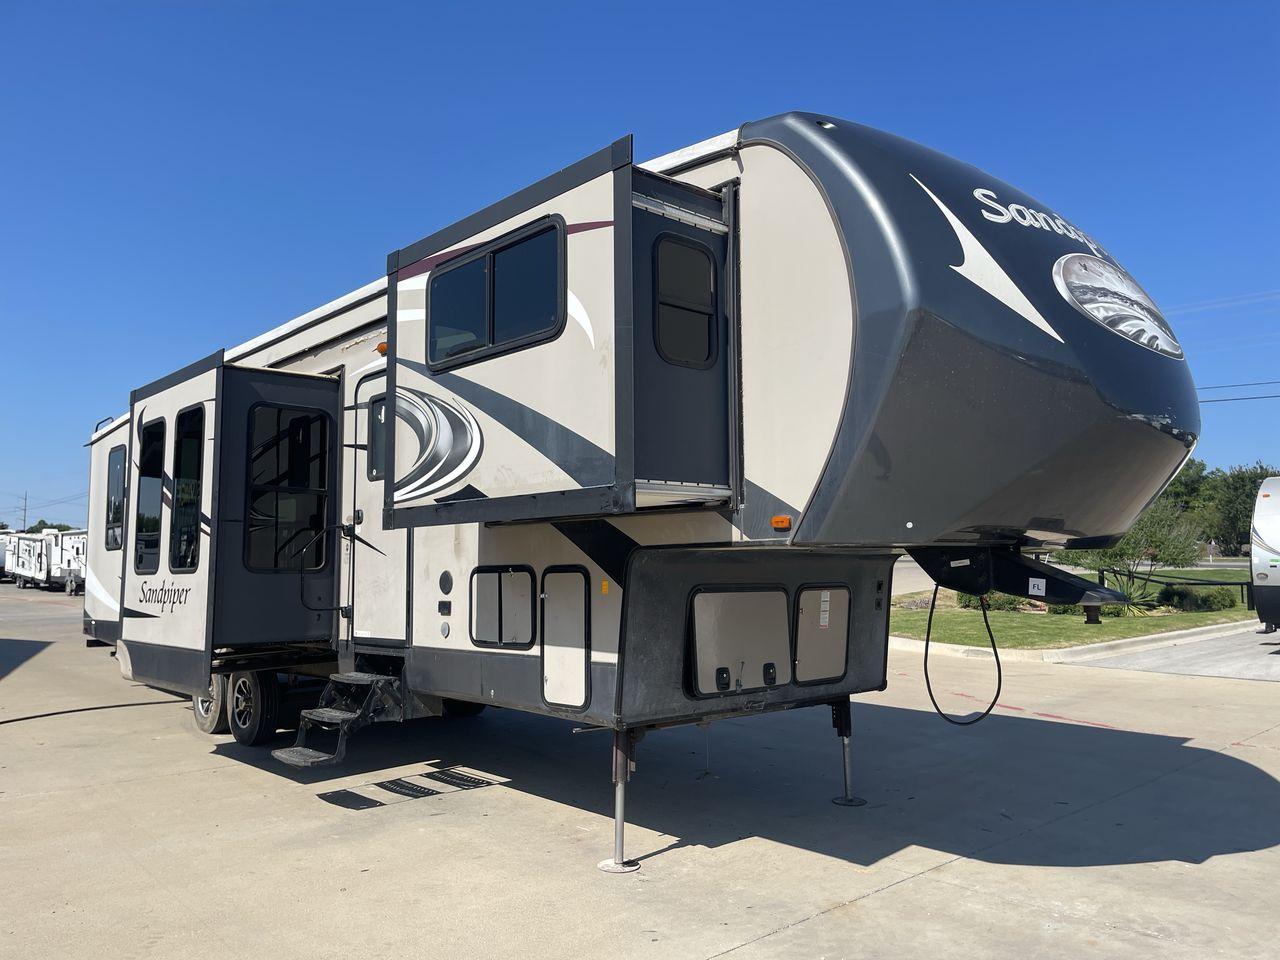 2015 BROWN FOREST RIVER SANDPIPER FLIK (4X4FSAP22FJ) , Length: 41.67 ft | Dry Weight: 11,821 lbs | Gross Weight: 15,500 lbs | Slides: 5 transmission, located at 4319 N Main Street, Cleburne, TX, 76033, (817) 221-0660, 32.435829, -97.384178 - This 2015 Sandpiper Flik by Forest River luxury fifth wheel measures 41.67 ft in length and 13.17 ft in height. It has a base weight of 11,821 lbs with a payload capacity of 3,679 lbs. The GVWR is about 15,500 lbs and has a hitch weight of 2,235 lbs. It features five electric slideouts and one 21 ft - Photo #23